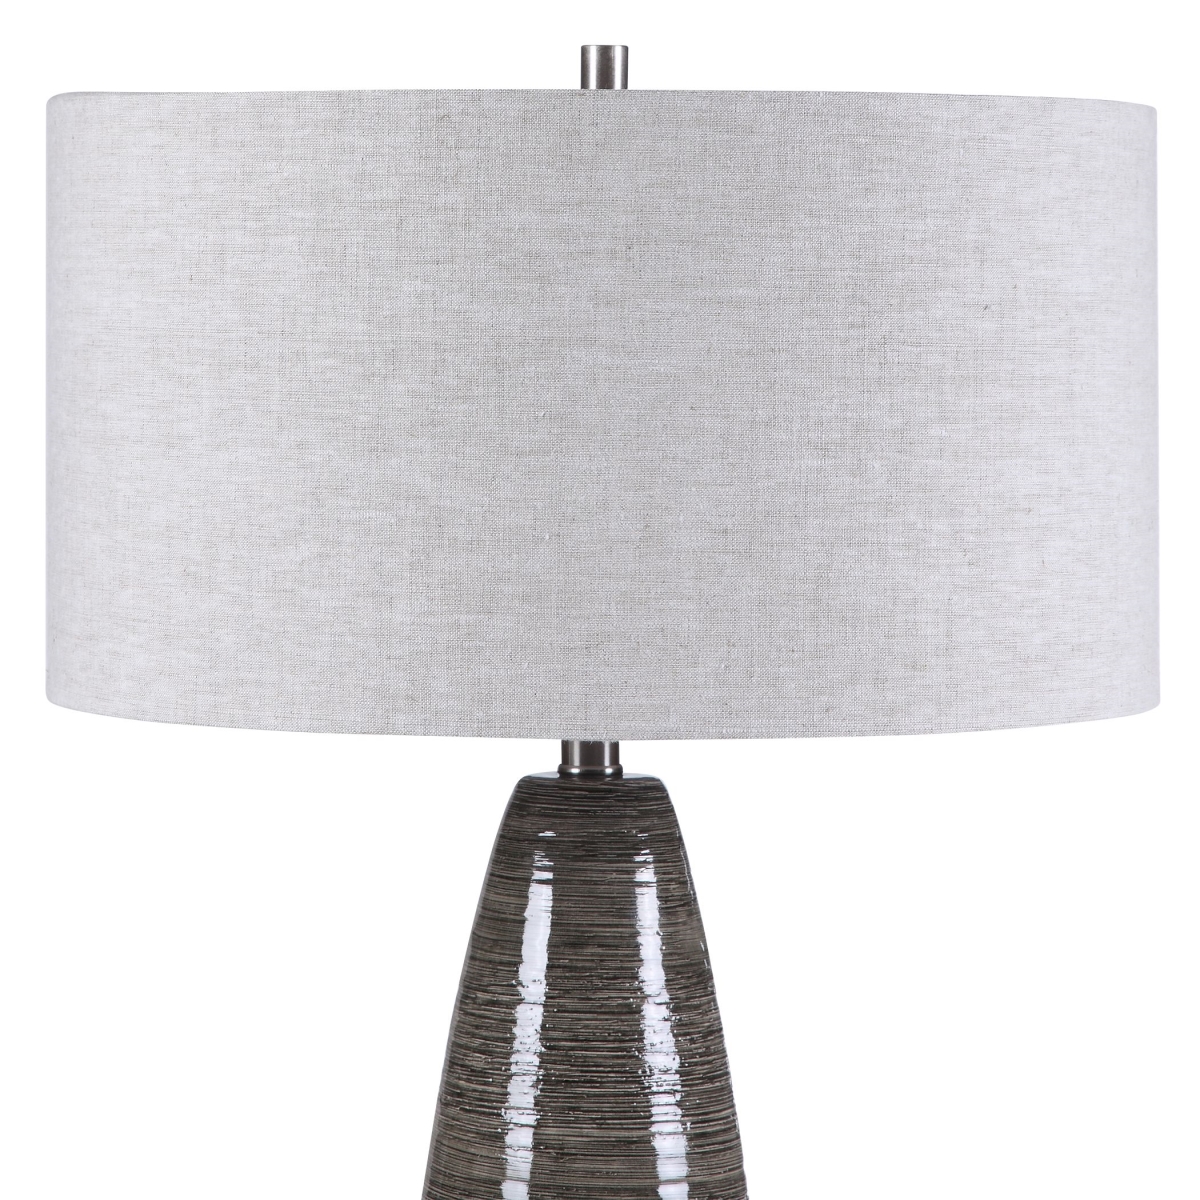 28280 10 X 10 X 31 In. Cosmo Charcoal Table Lamp